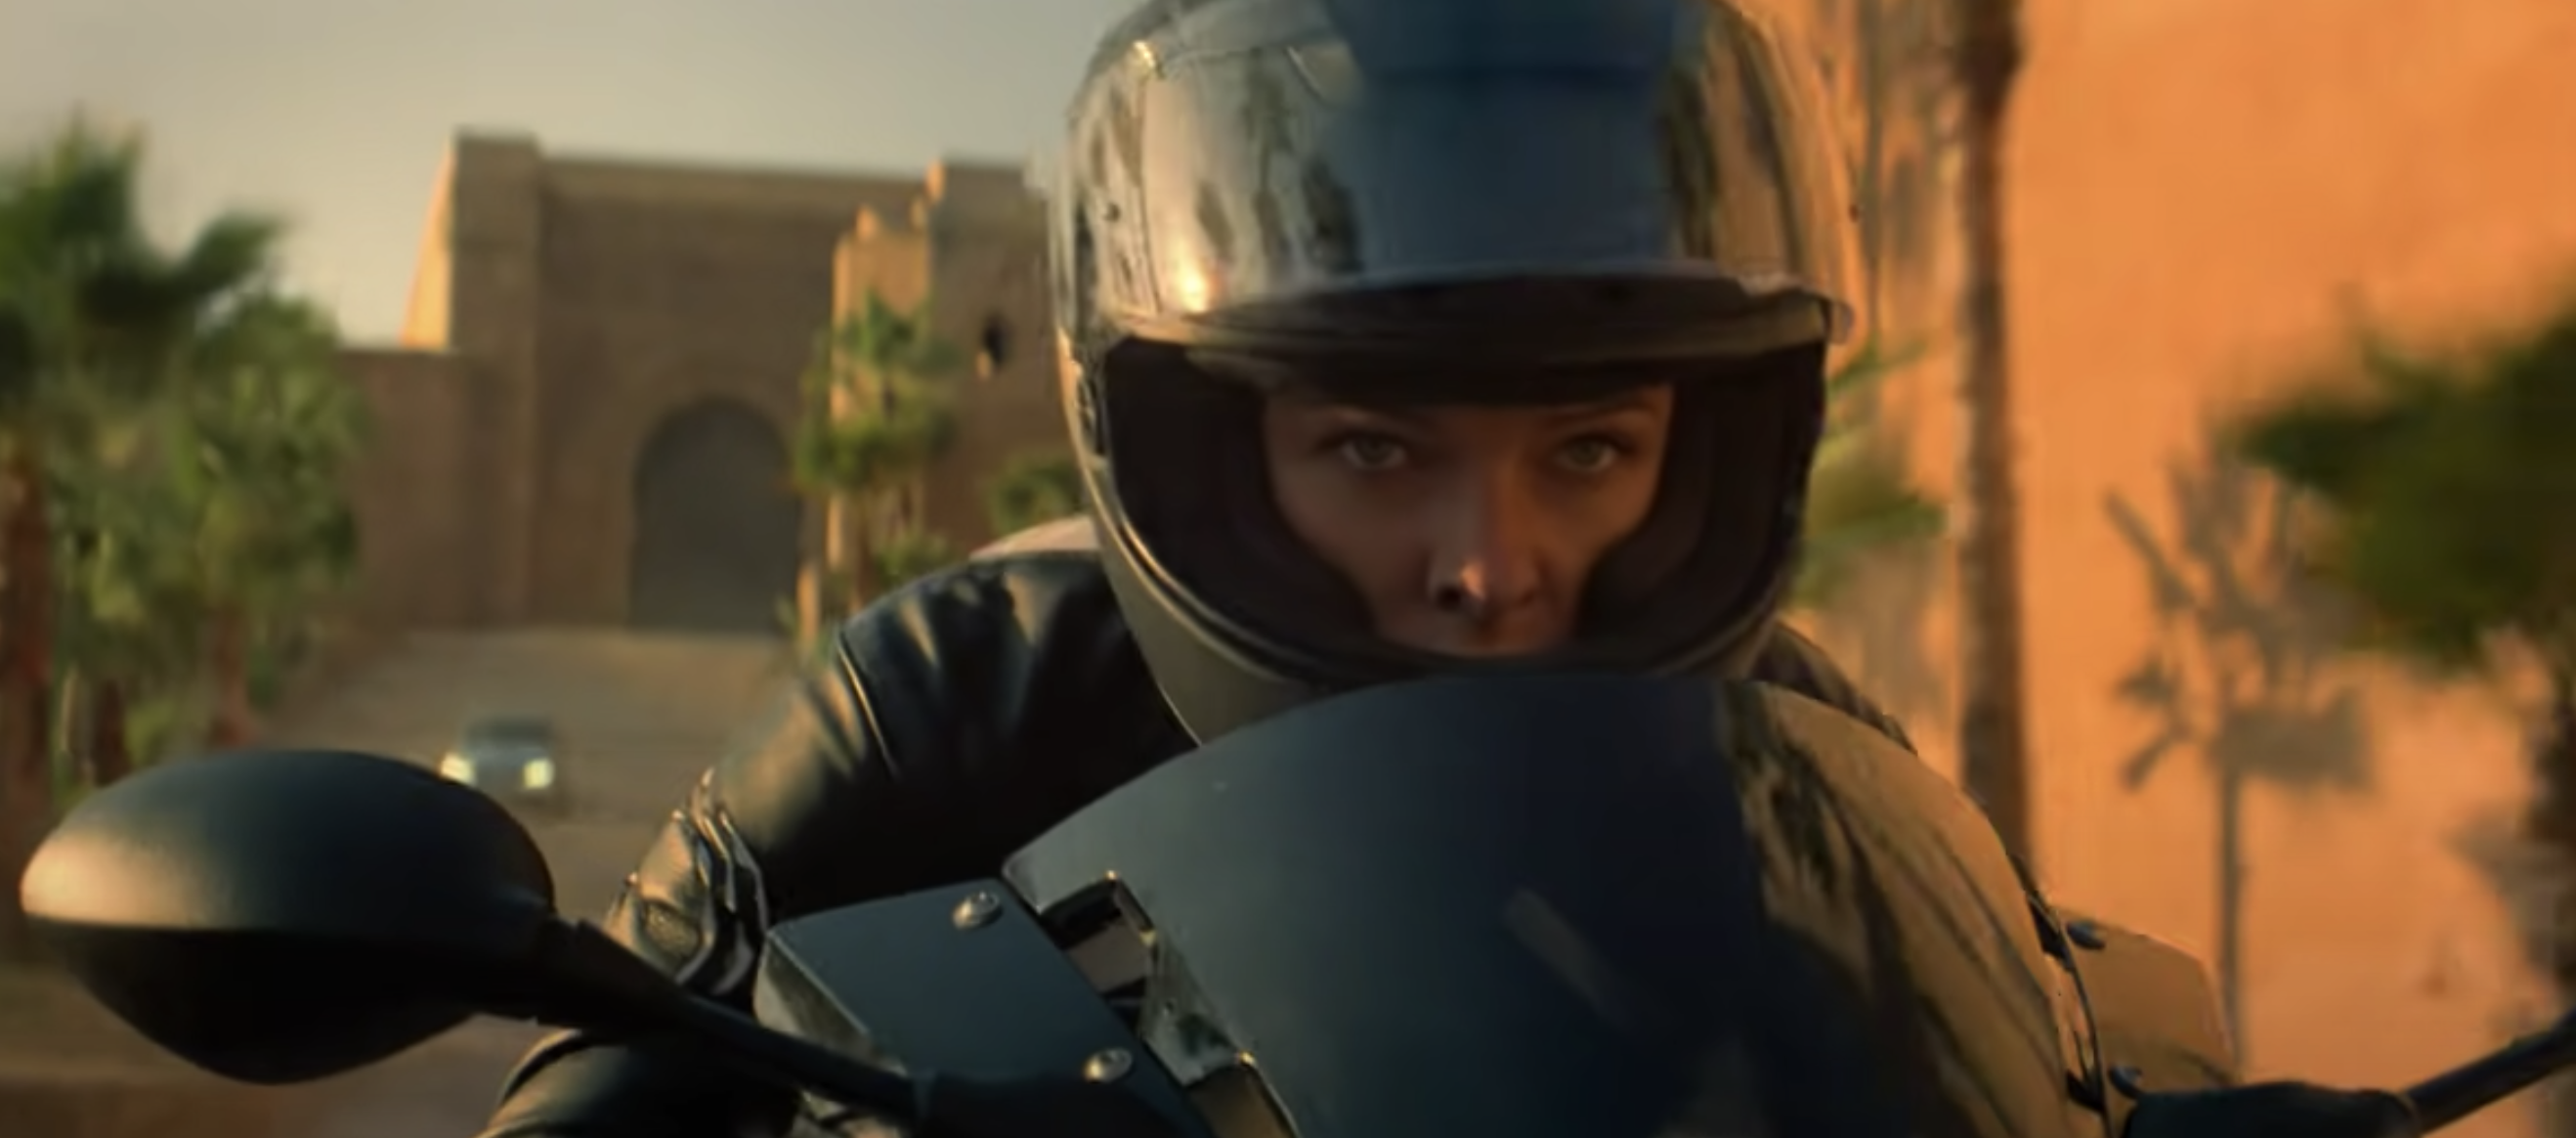 A person wearing a helmet on a motorcycle with eyes bare